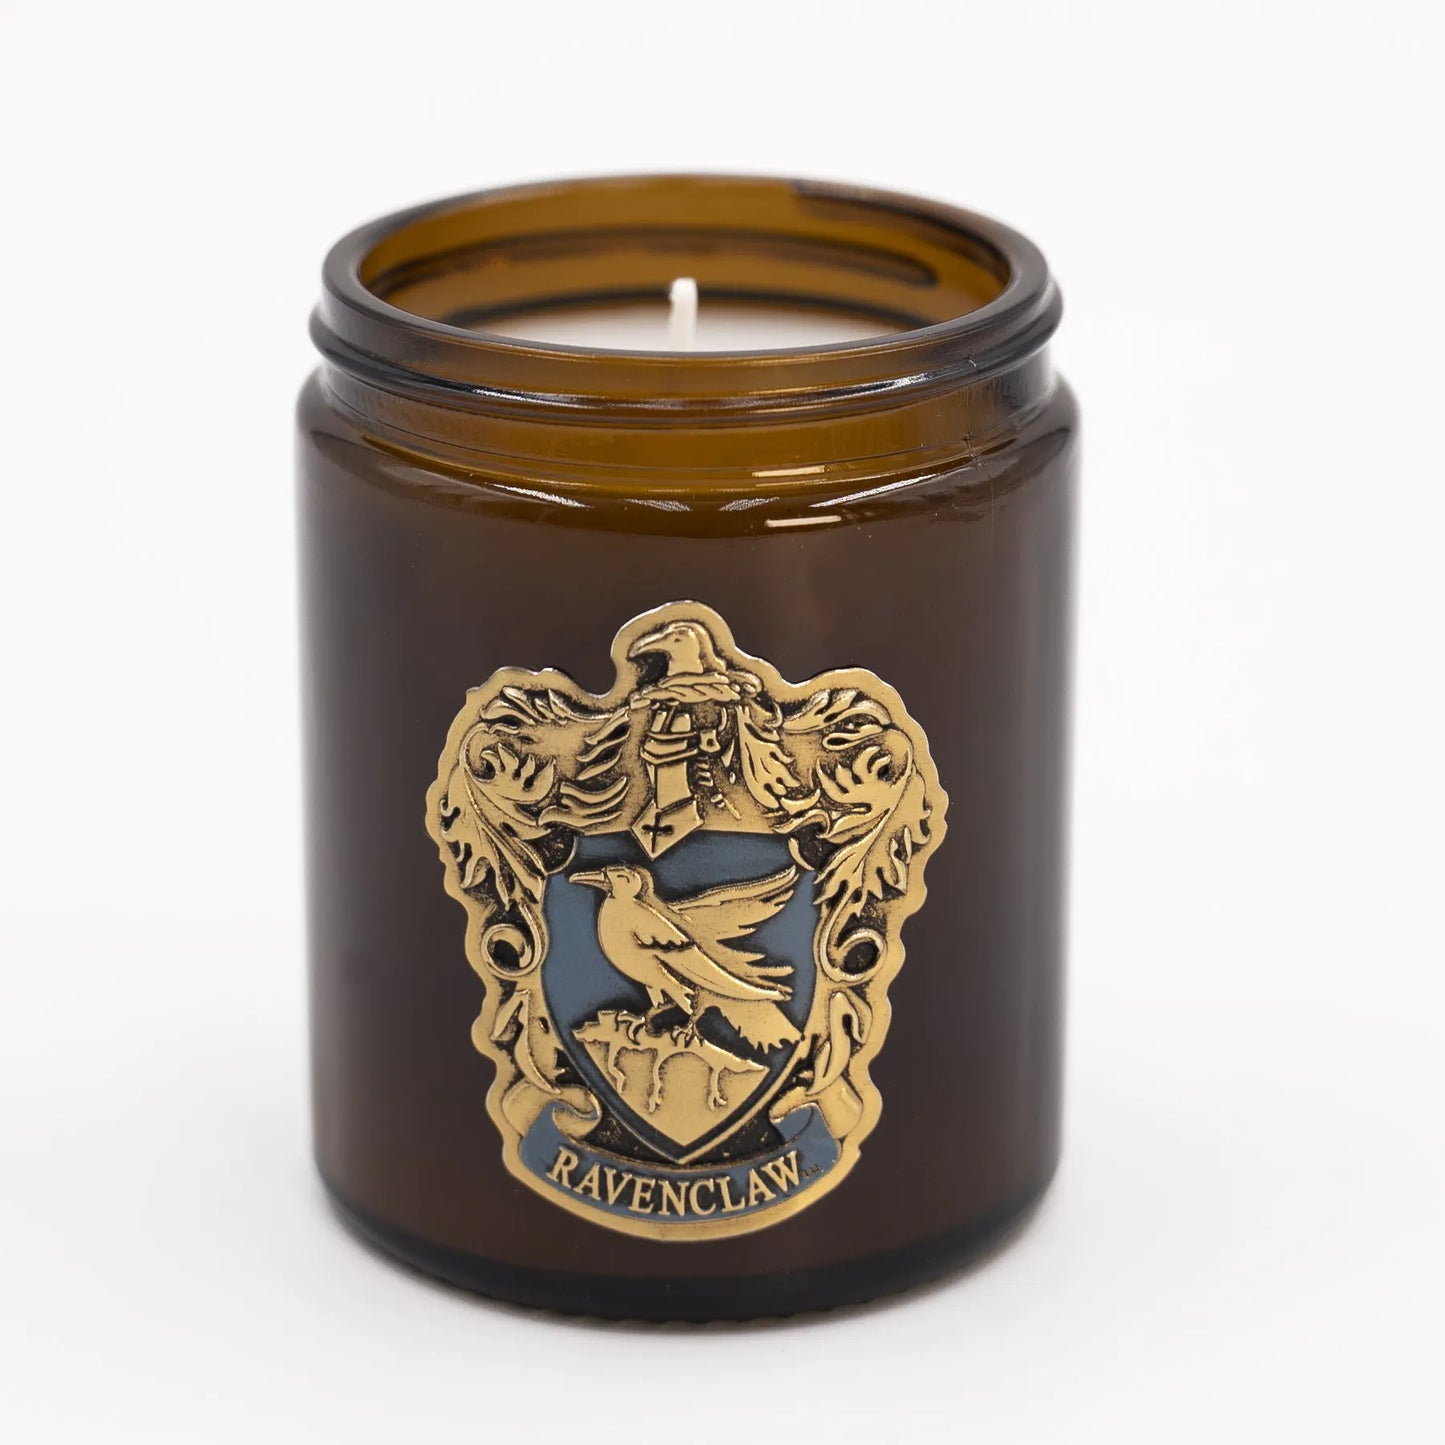 HARRY POTTER SCENTED CANDLE - RAVENCLAW (RAVENCLAW)